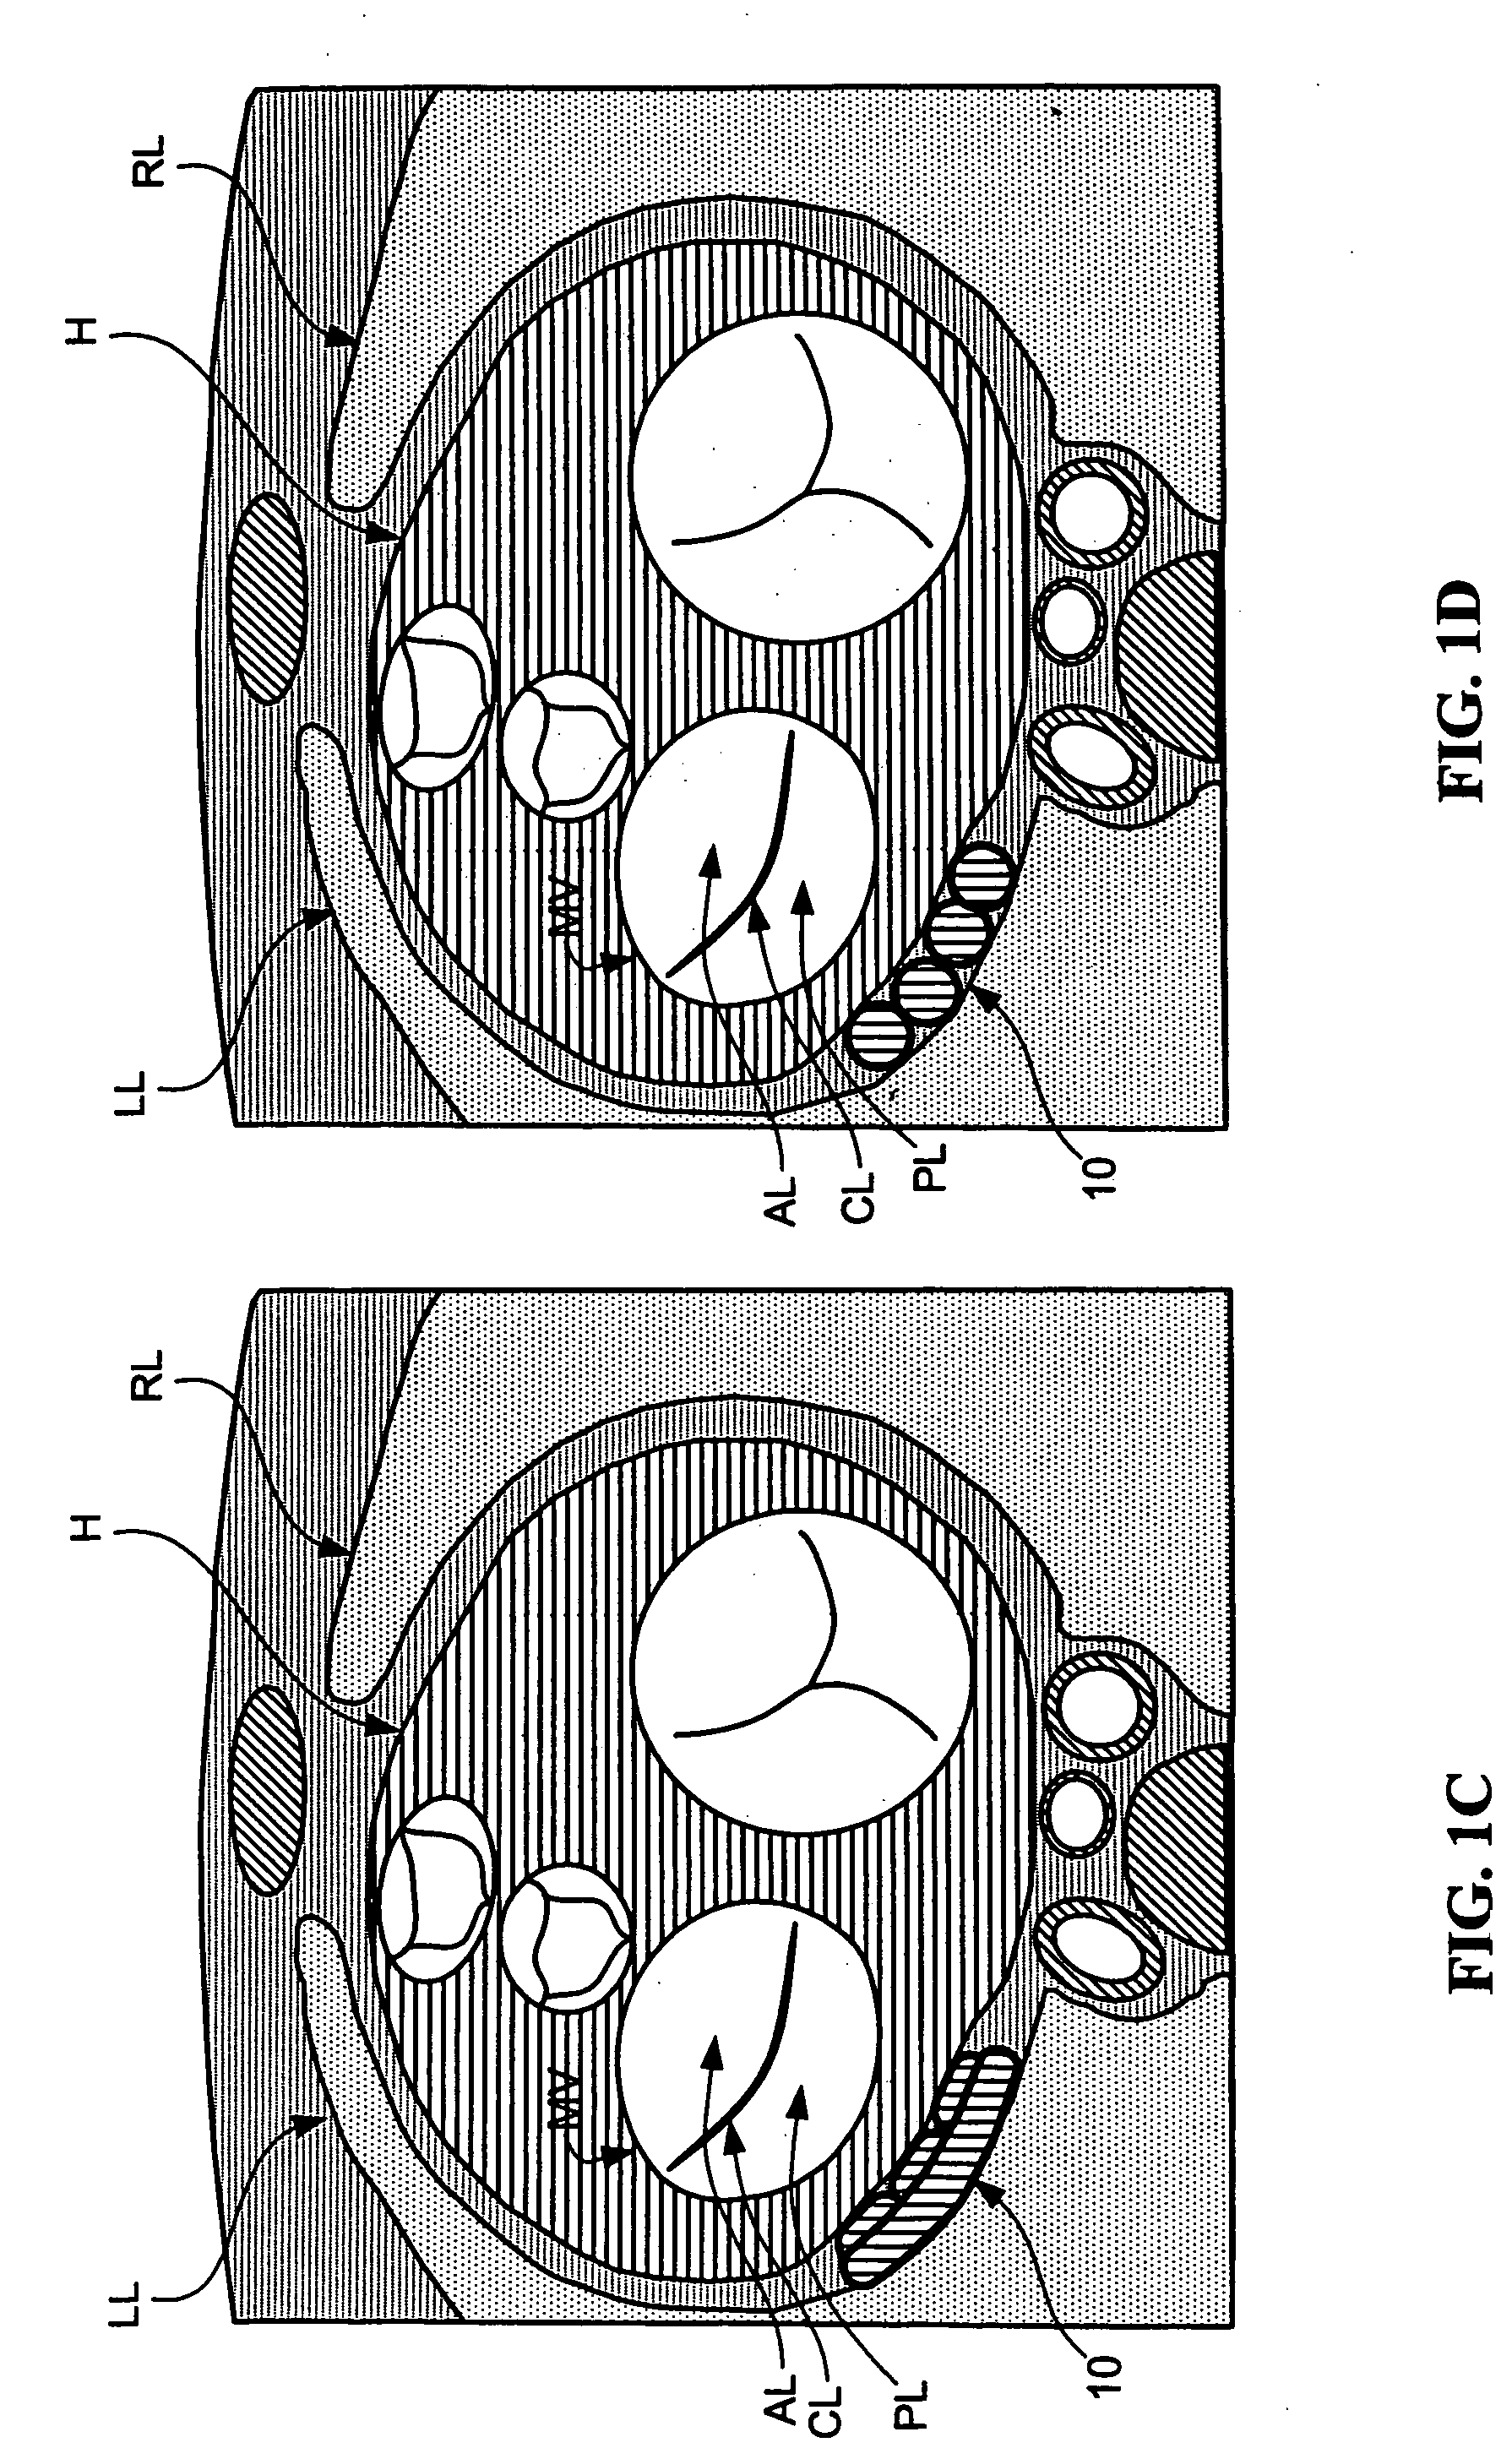 Decives and methods for heart valve treatment